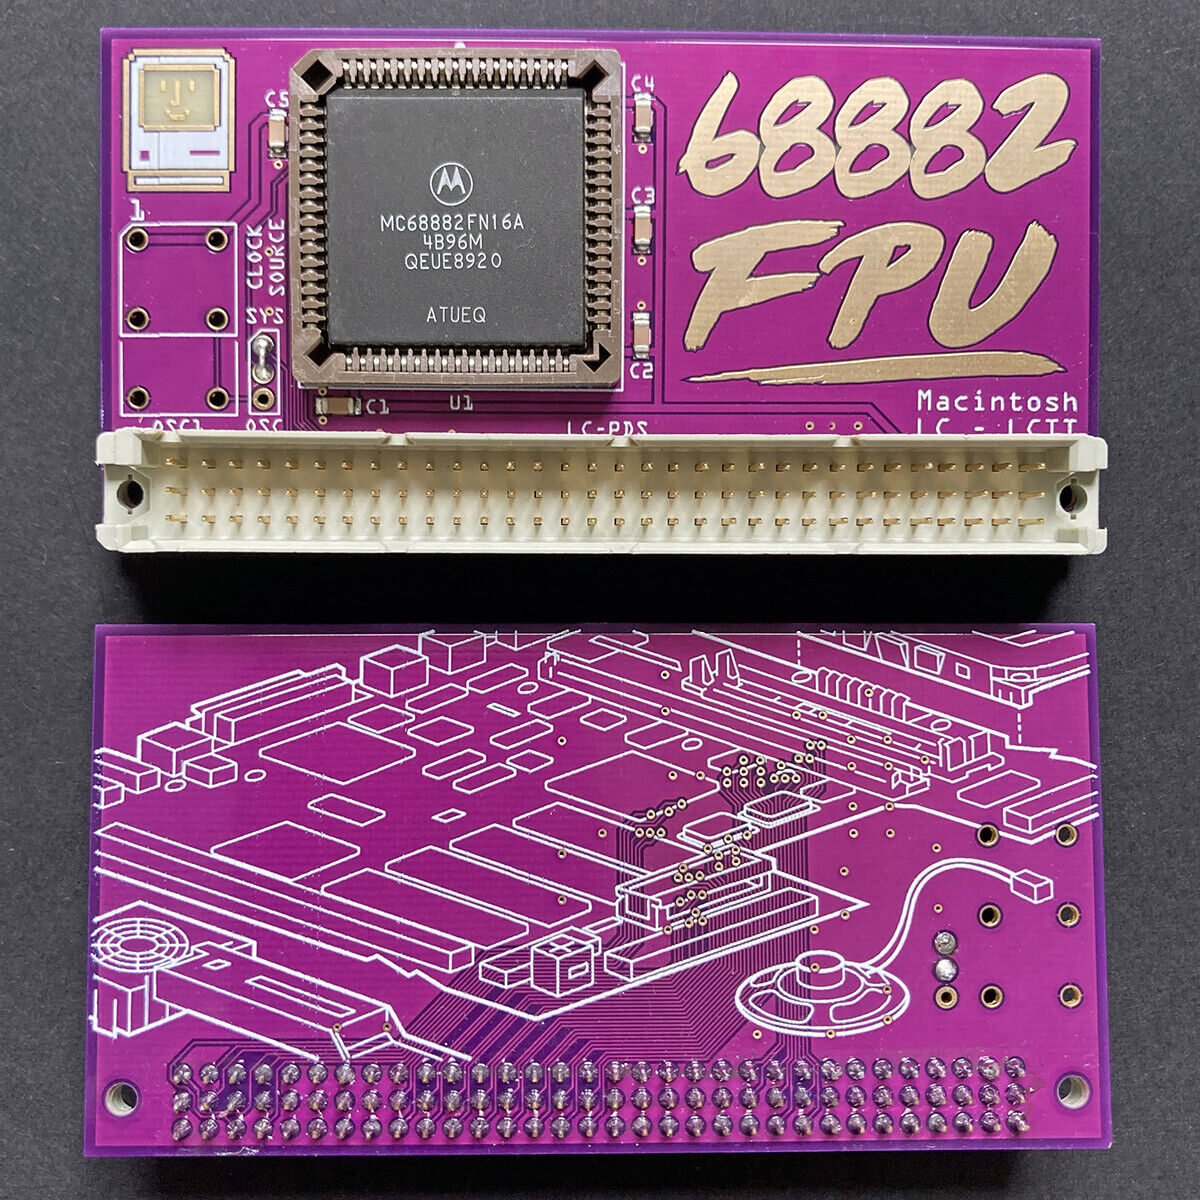 Newly made LC-PDS 68882 FPU coprocessor card for Apple Macintosh computers